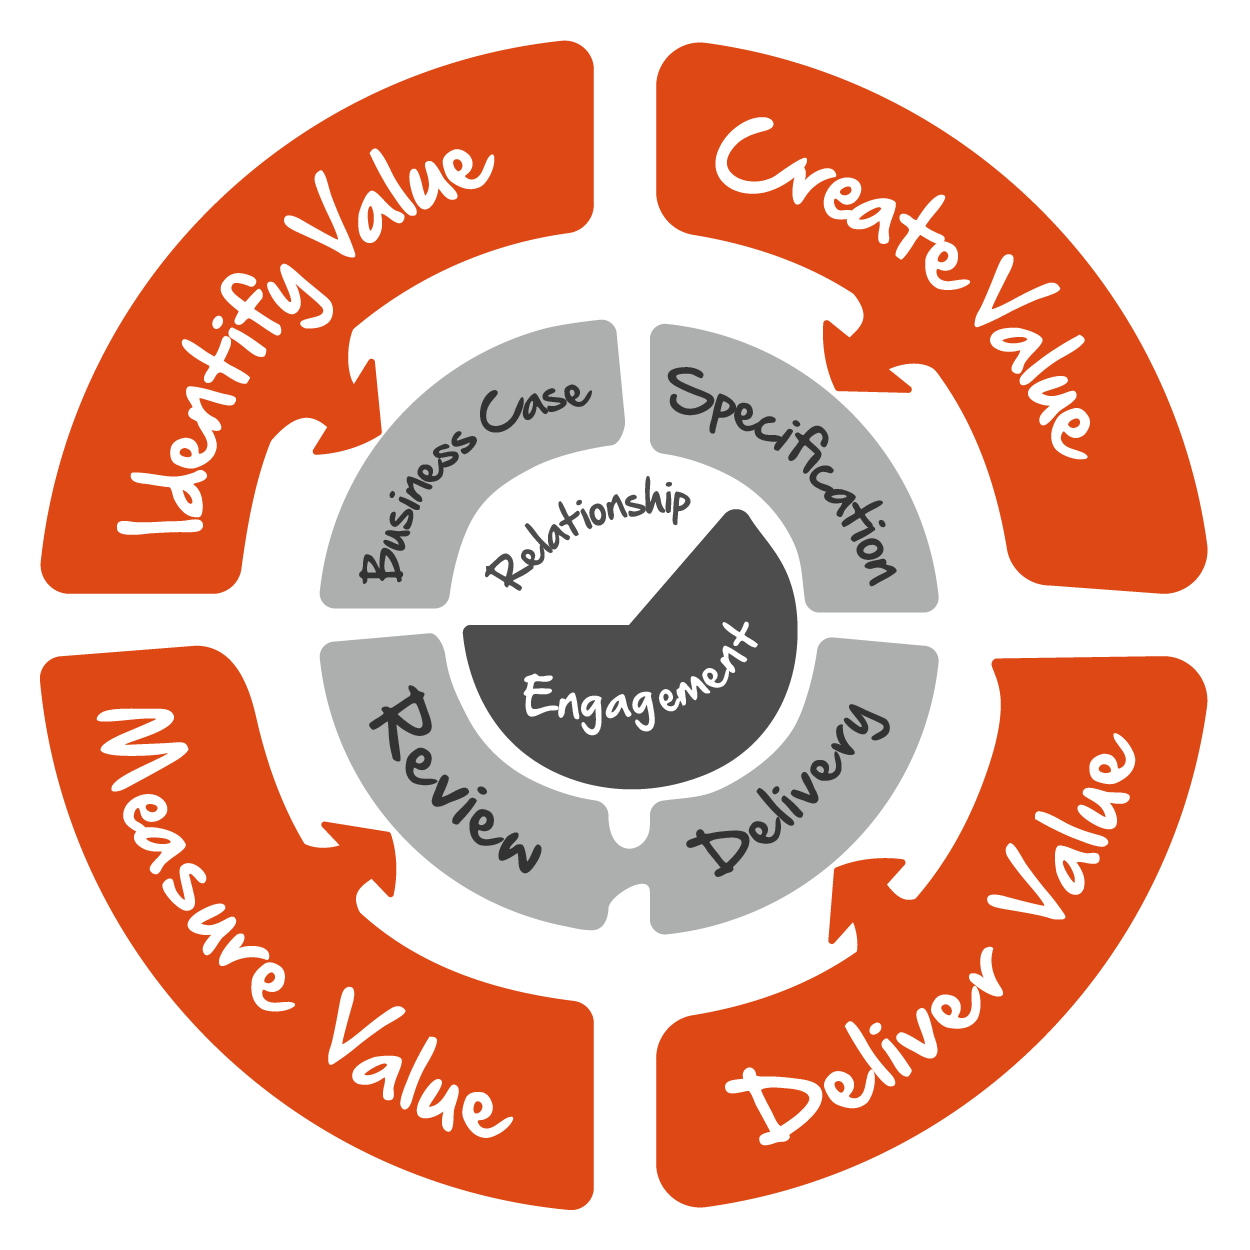 value selling Wheel - 4 step process